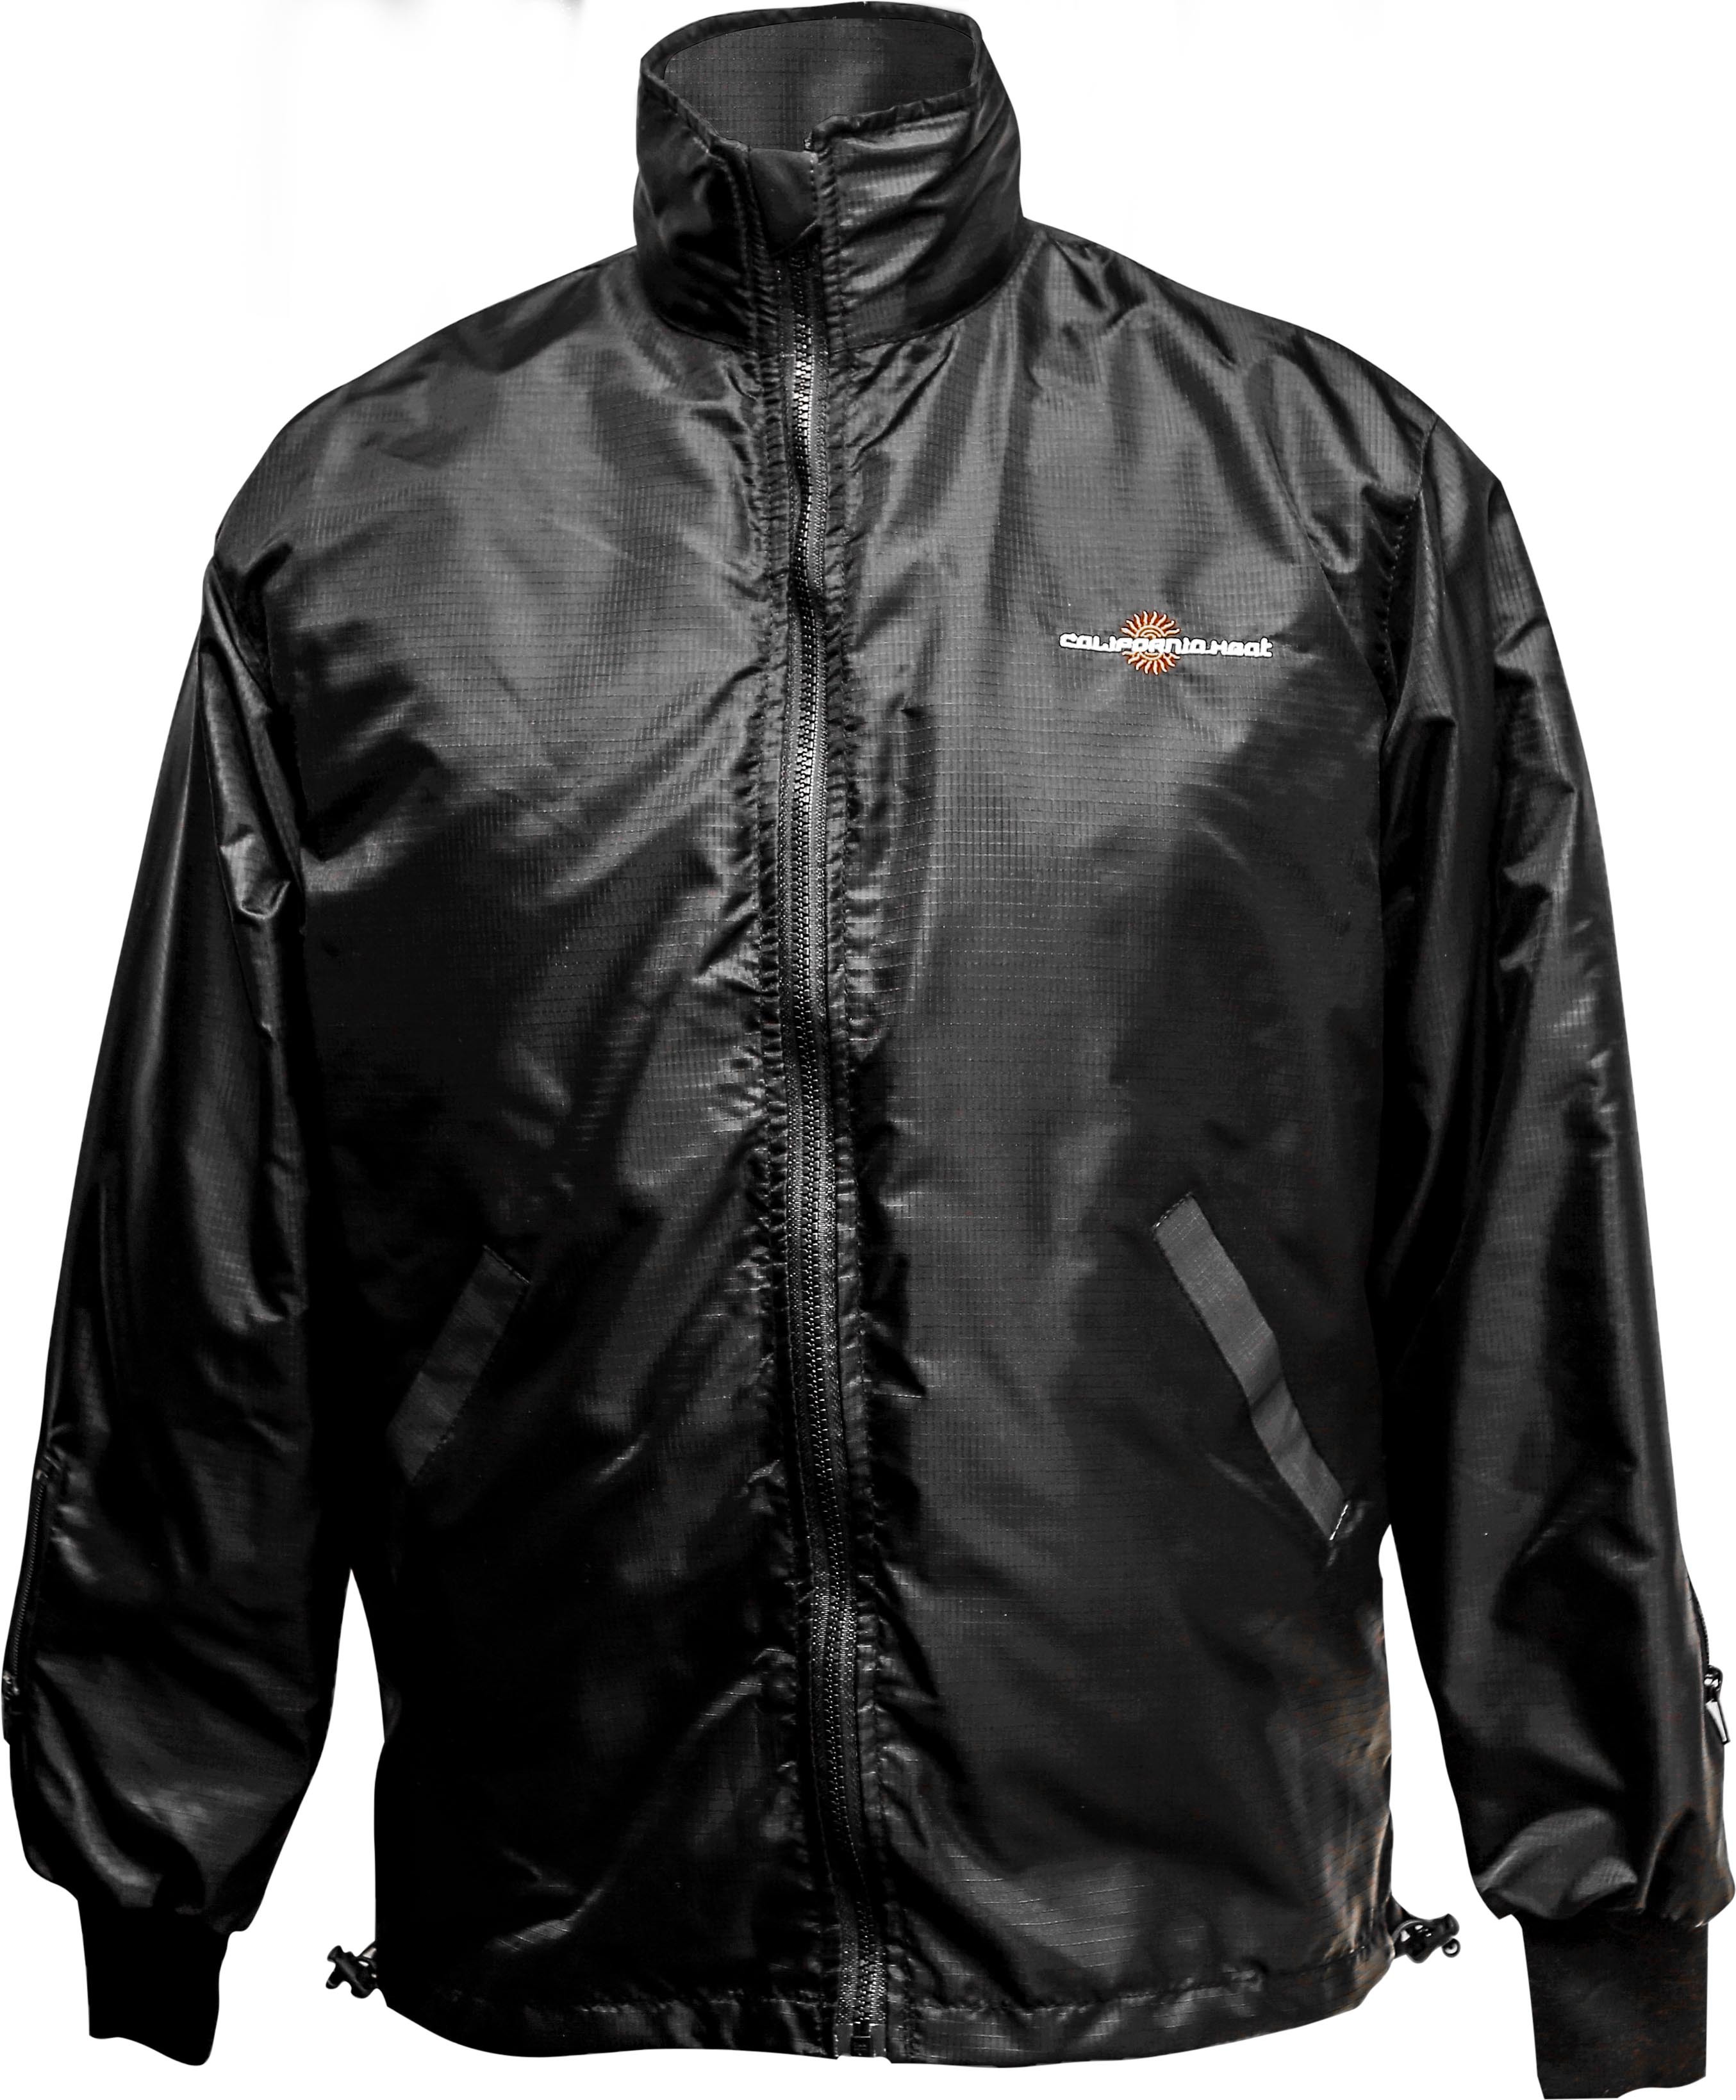 12V Heated Jacket Liner 3X-Large Tall - Click Image to Close